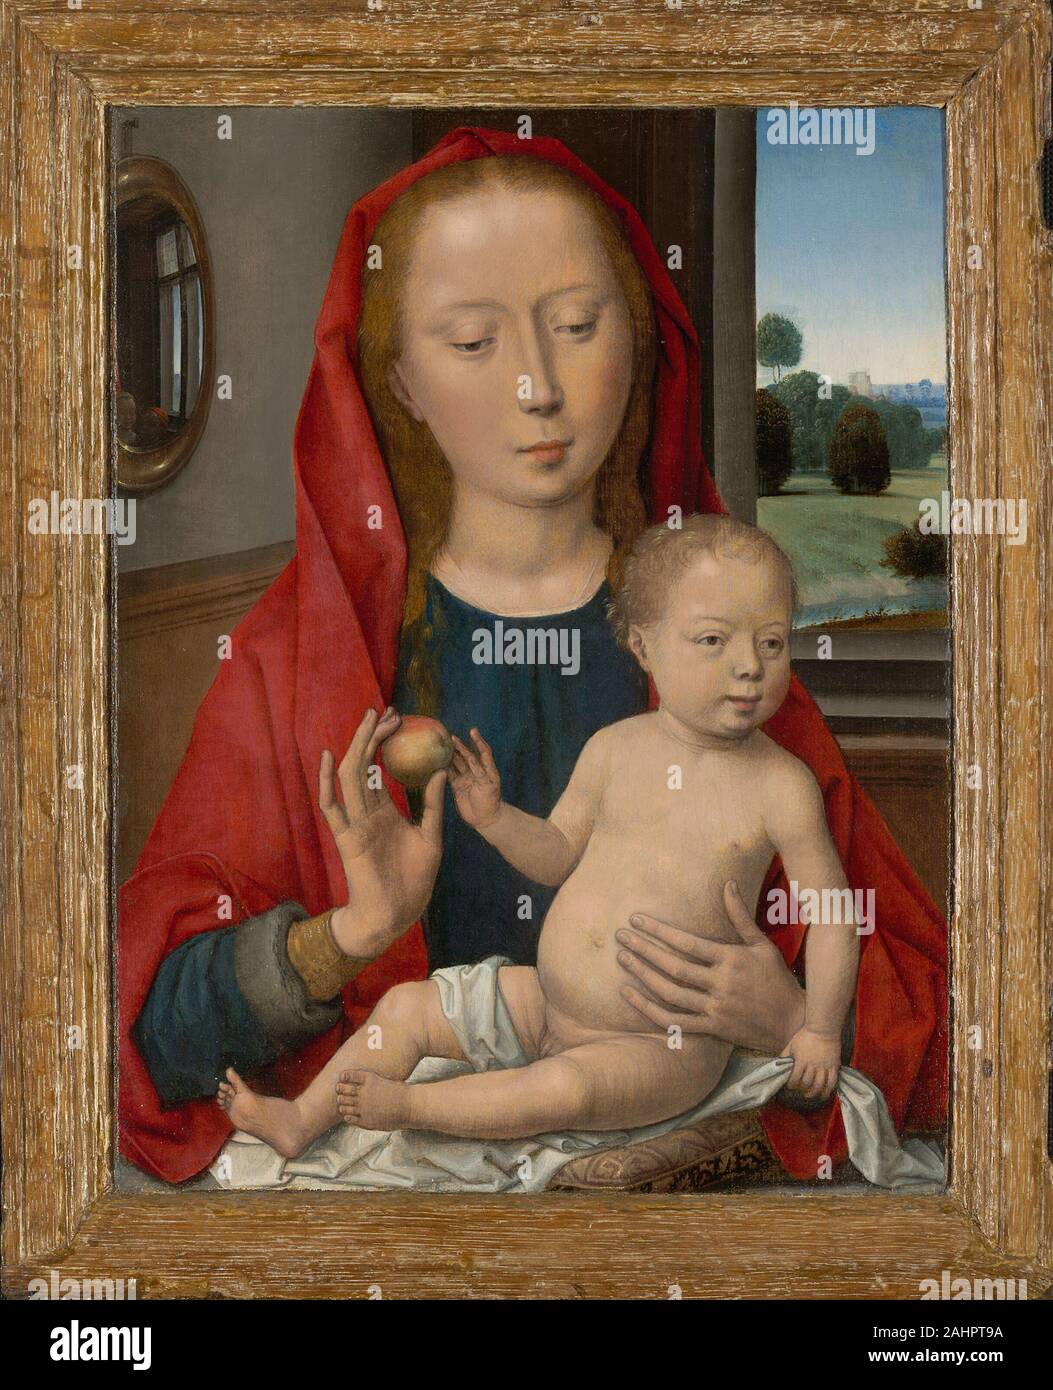 Hans Memling. Virgin and Child. 1480–1490. Netherlands. Oil on panel Hans Memling probably worked with Rogier van der Weyden in Brussels before settling in Bruges in 1465. Van der Weyden was well known for his exquisite devotional diptychs, and Memling was influenced by his work, though he made his paired paintings more realistic by setting the figures in a measurable domestic space. This portrait of the unidentified patron and the image of the Virgin and Child were separated many years ago; they were reunited at the Art Institute of Chicago in 1953. Unfortunately, Portrait of a Man in Prayer Stock Photo